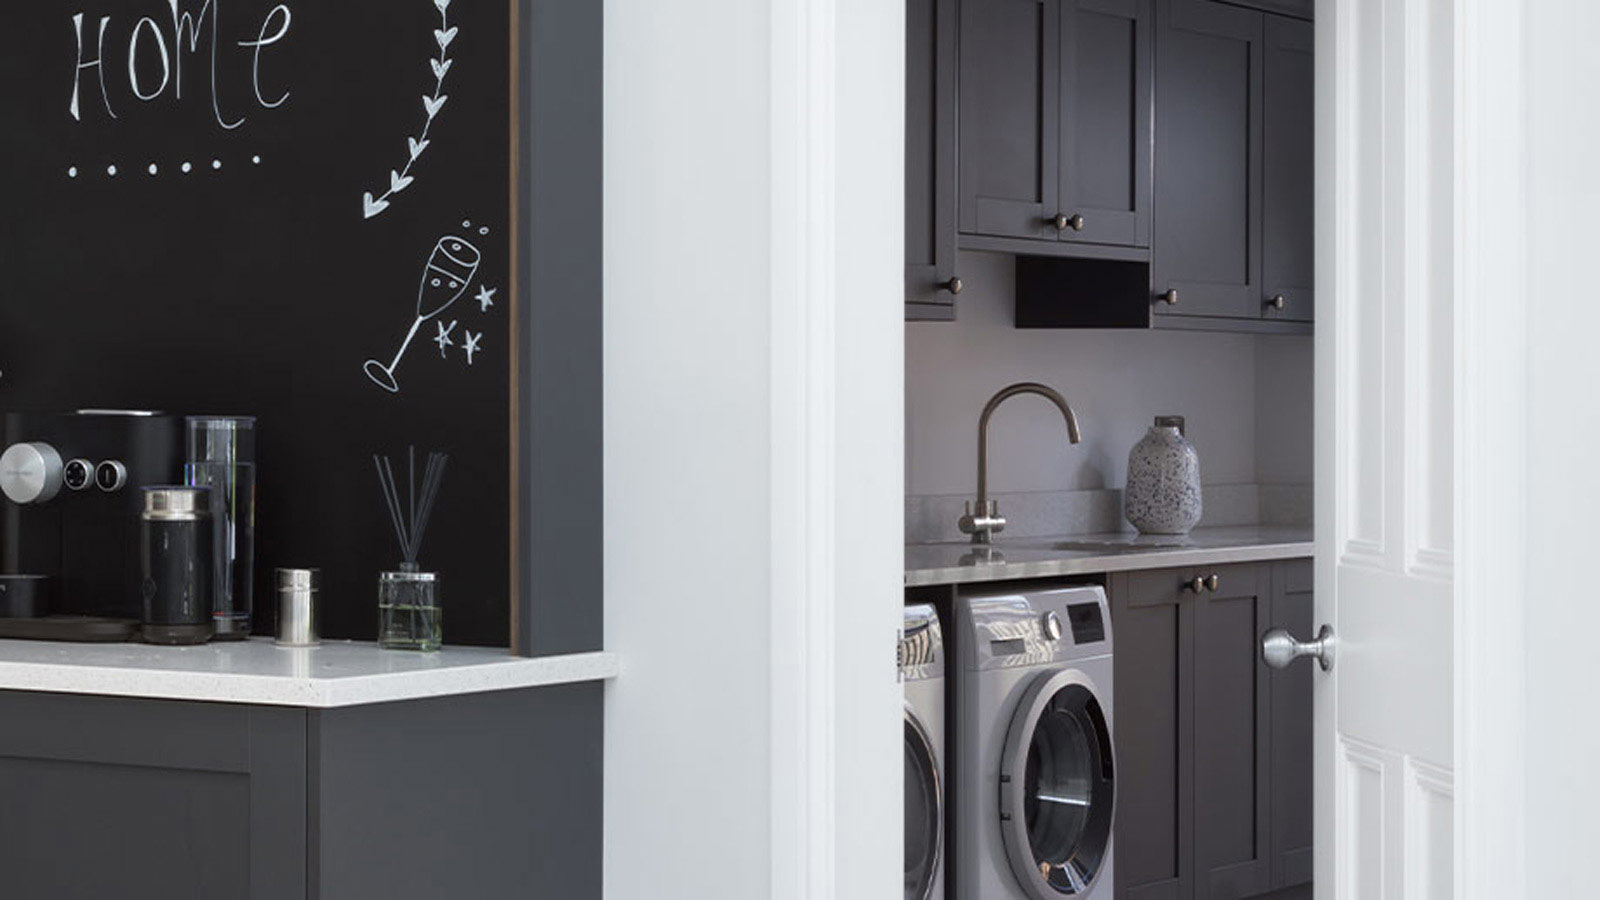 Utility room with shaker kitchen cabinets in grey